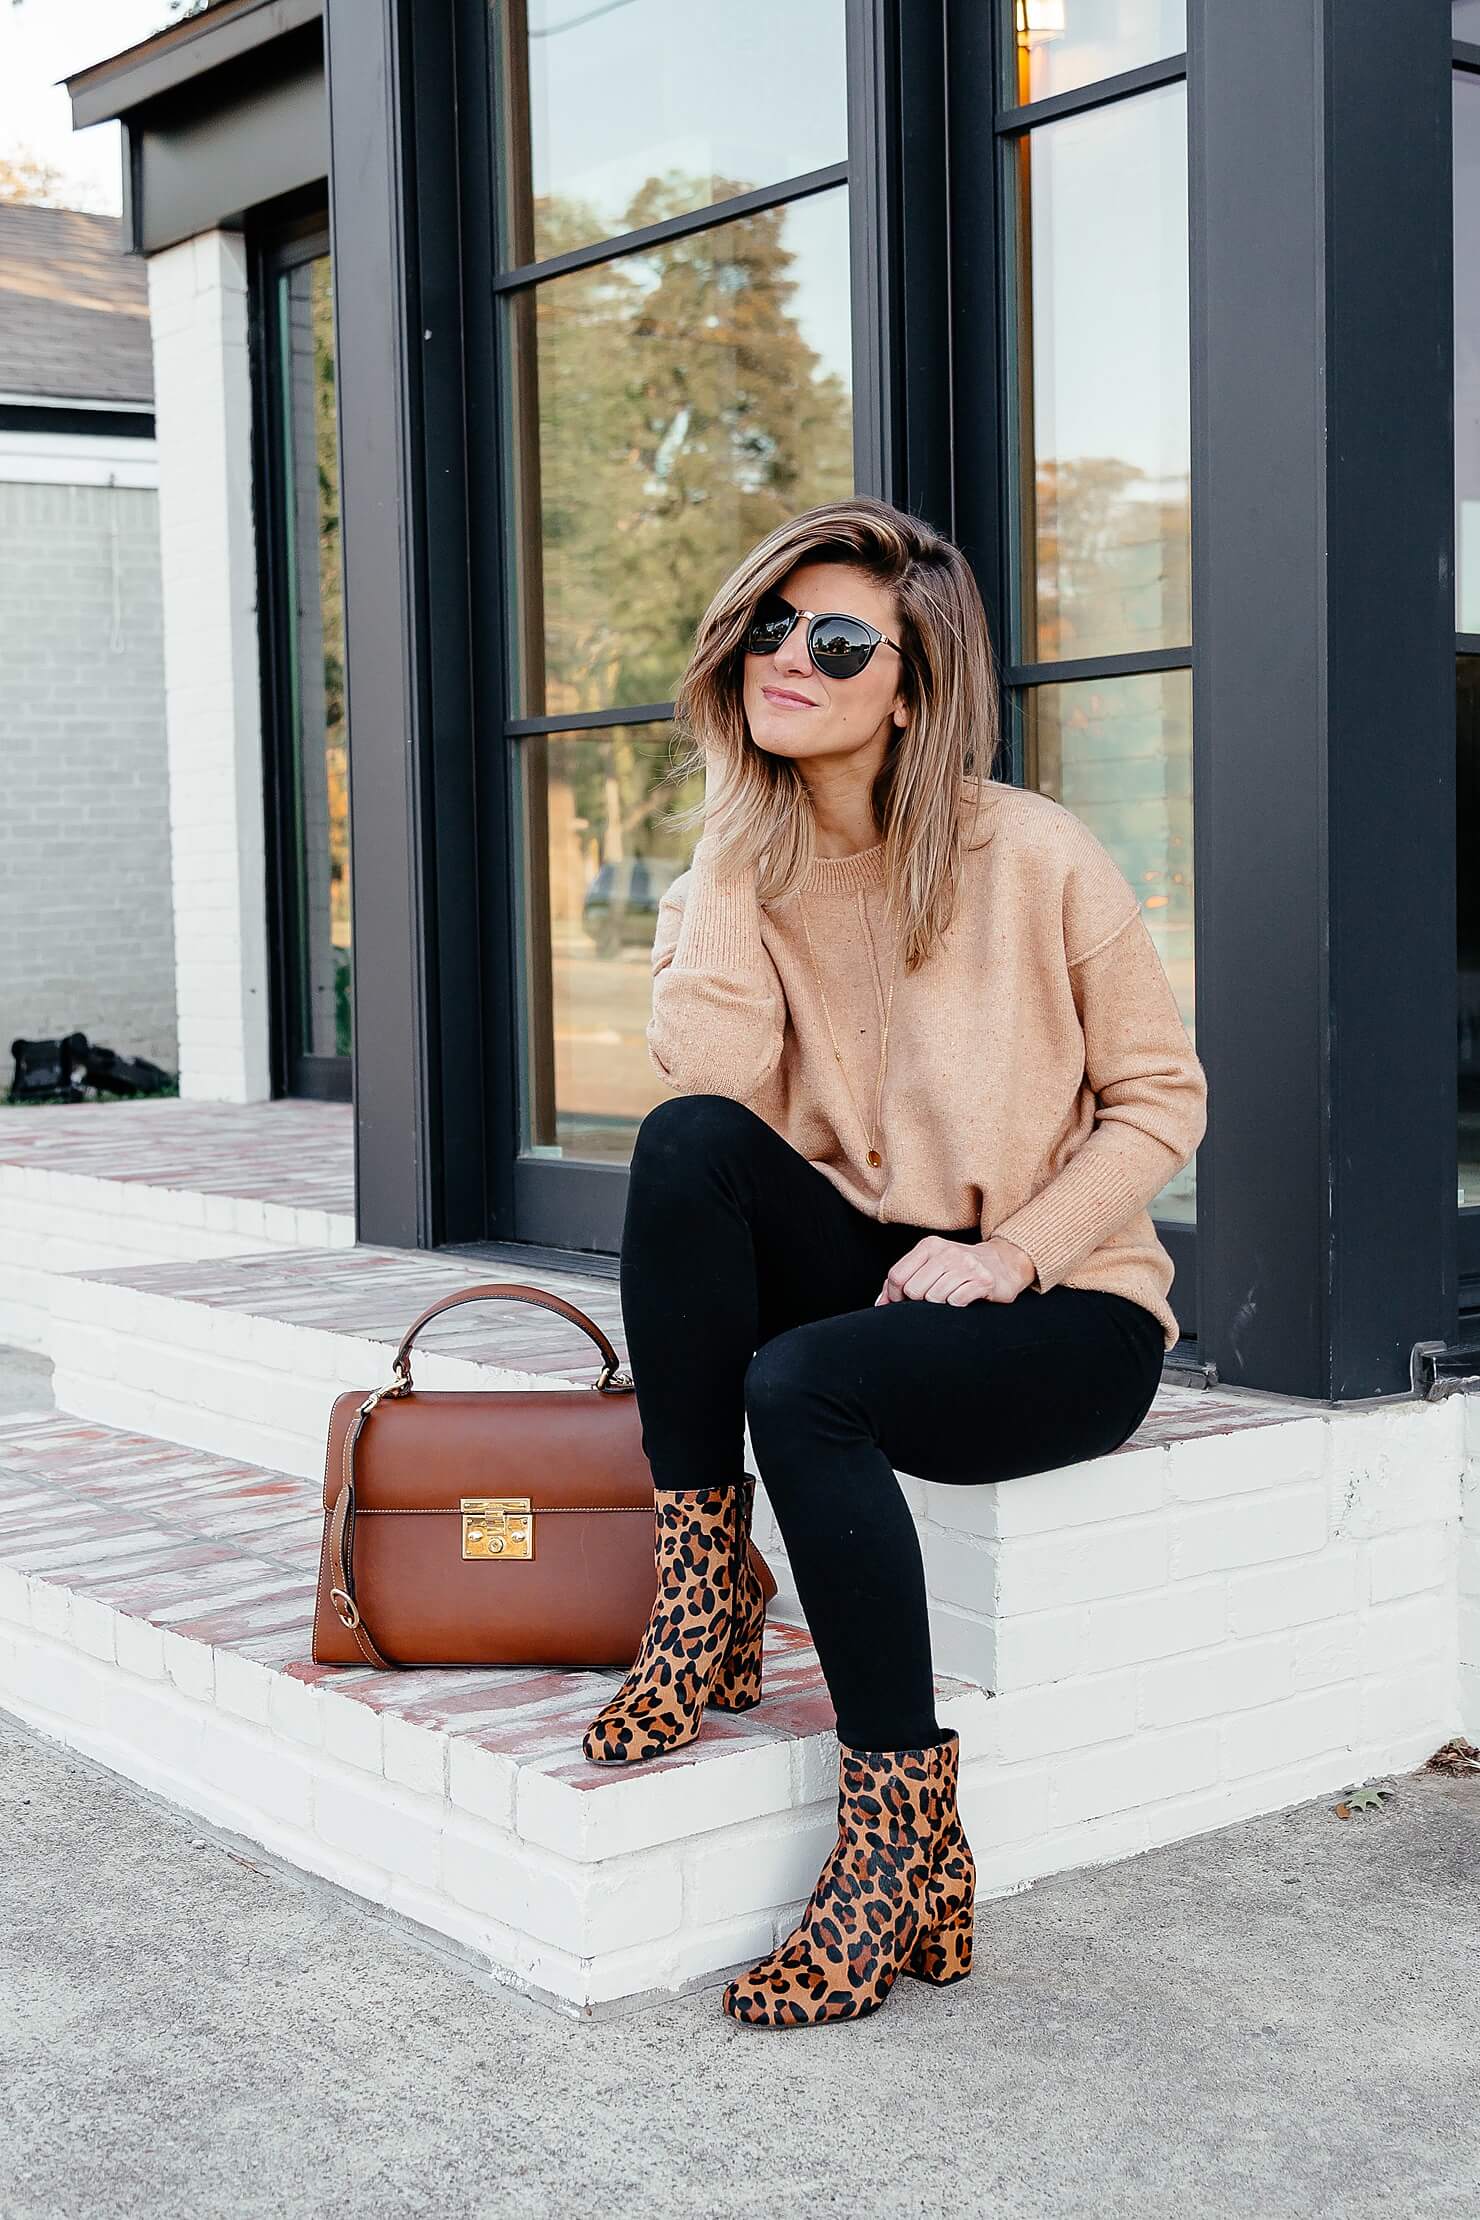 camel sweater, black jeans, leopard booties, brown leather bag, and black sunglasses